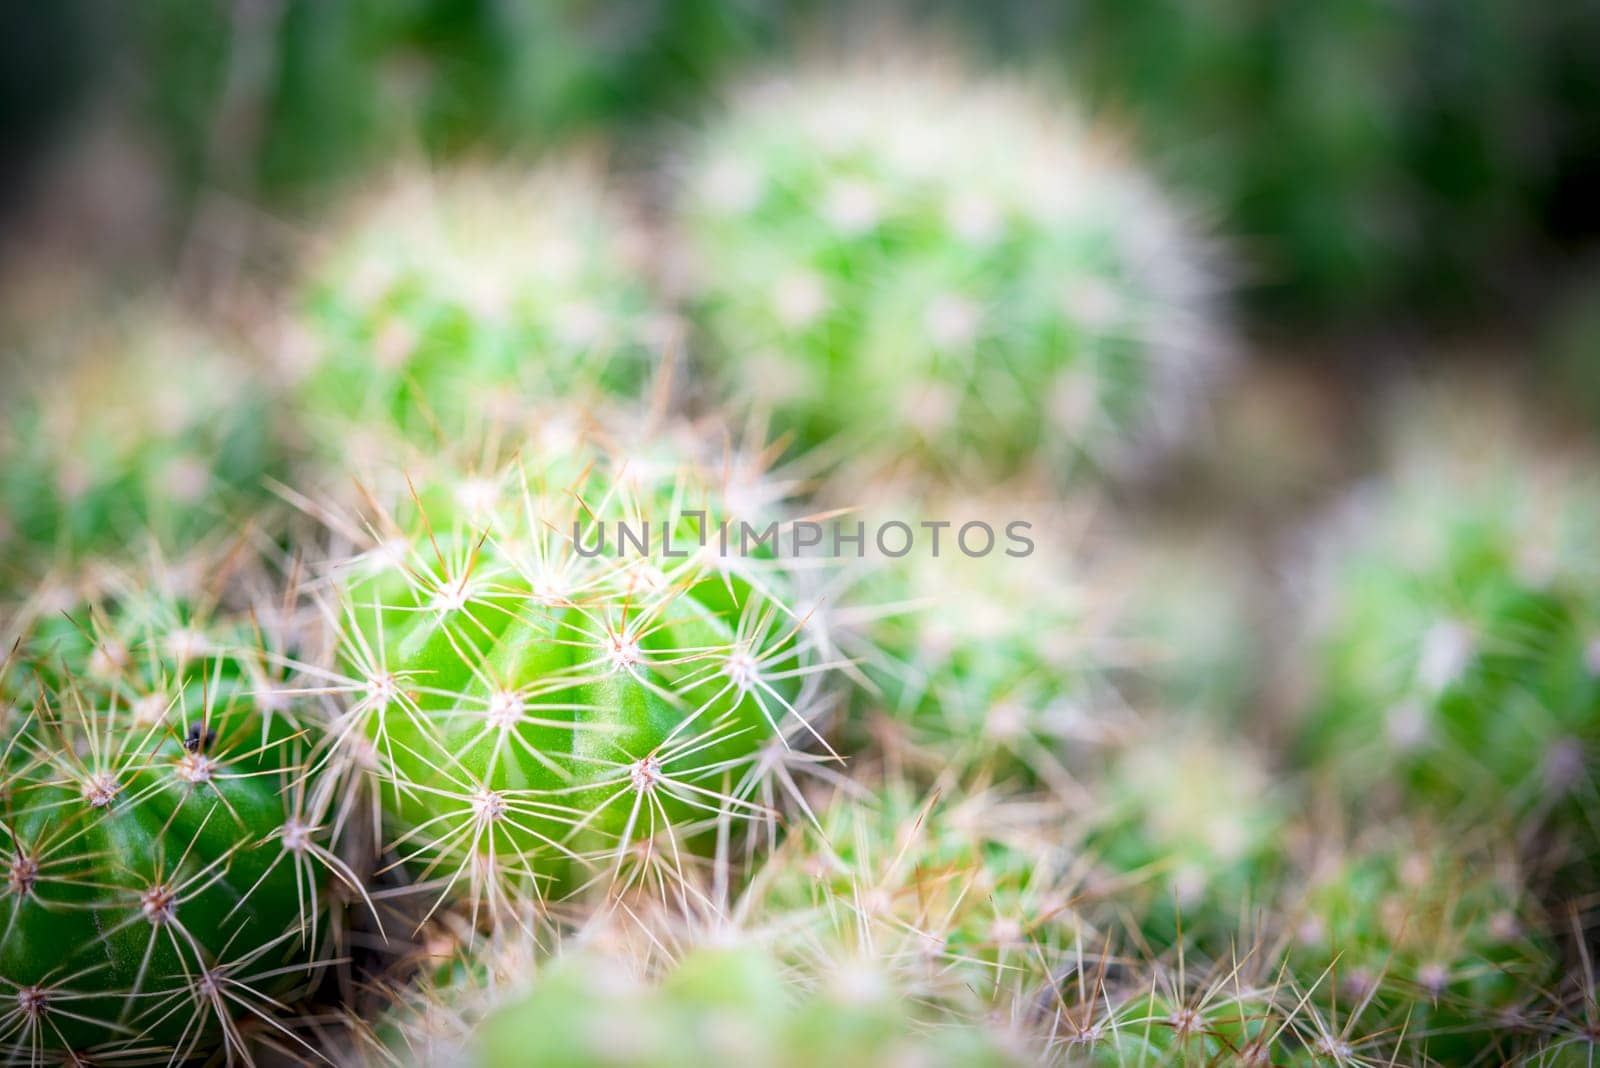 Cactus and Cactus flowers popular for decorative by PongMoji